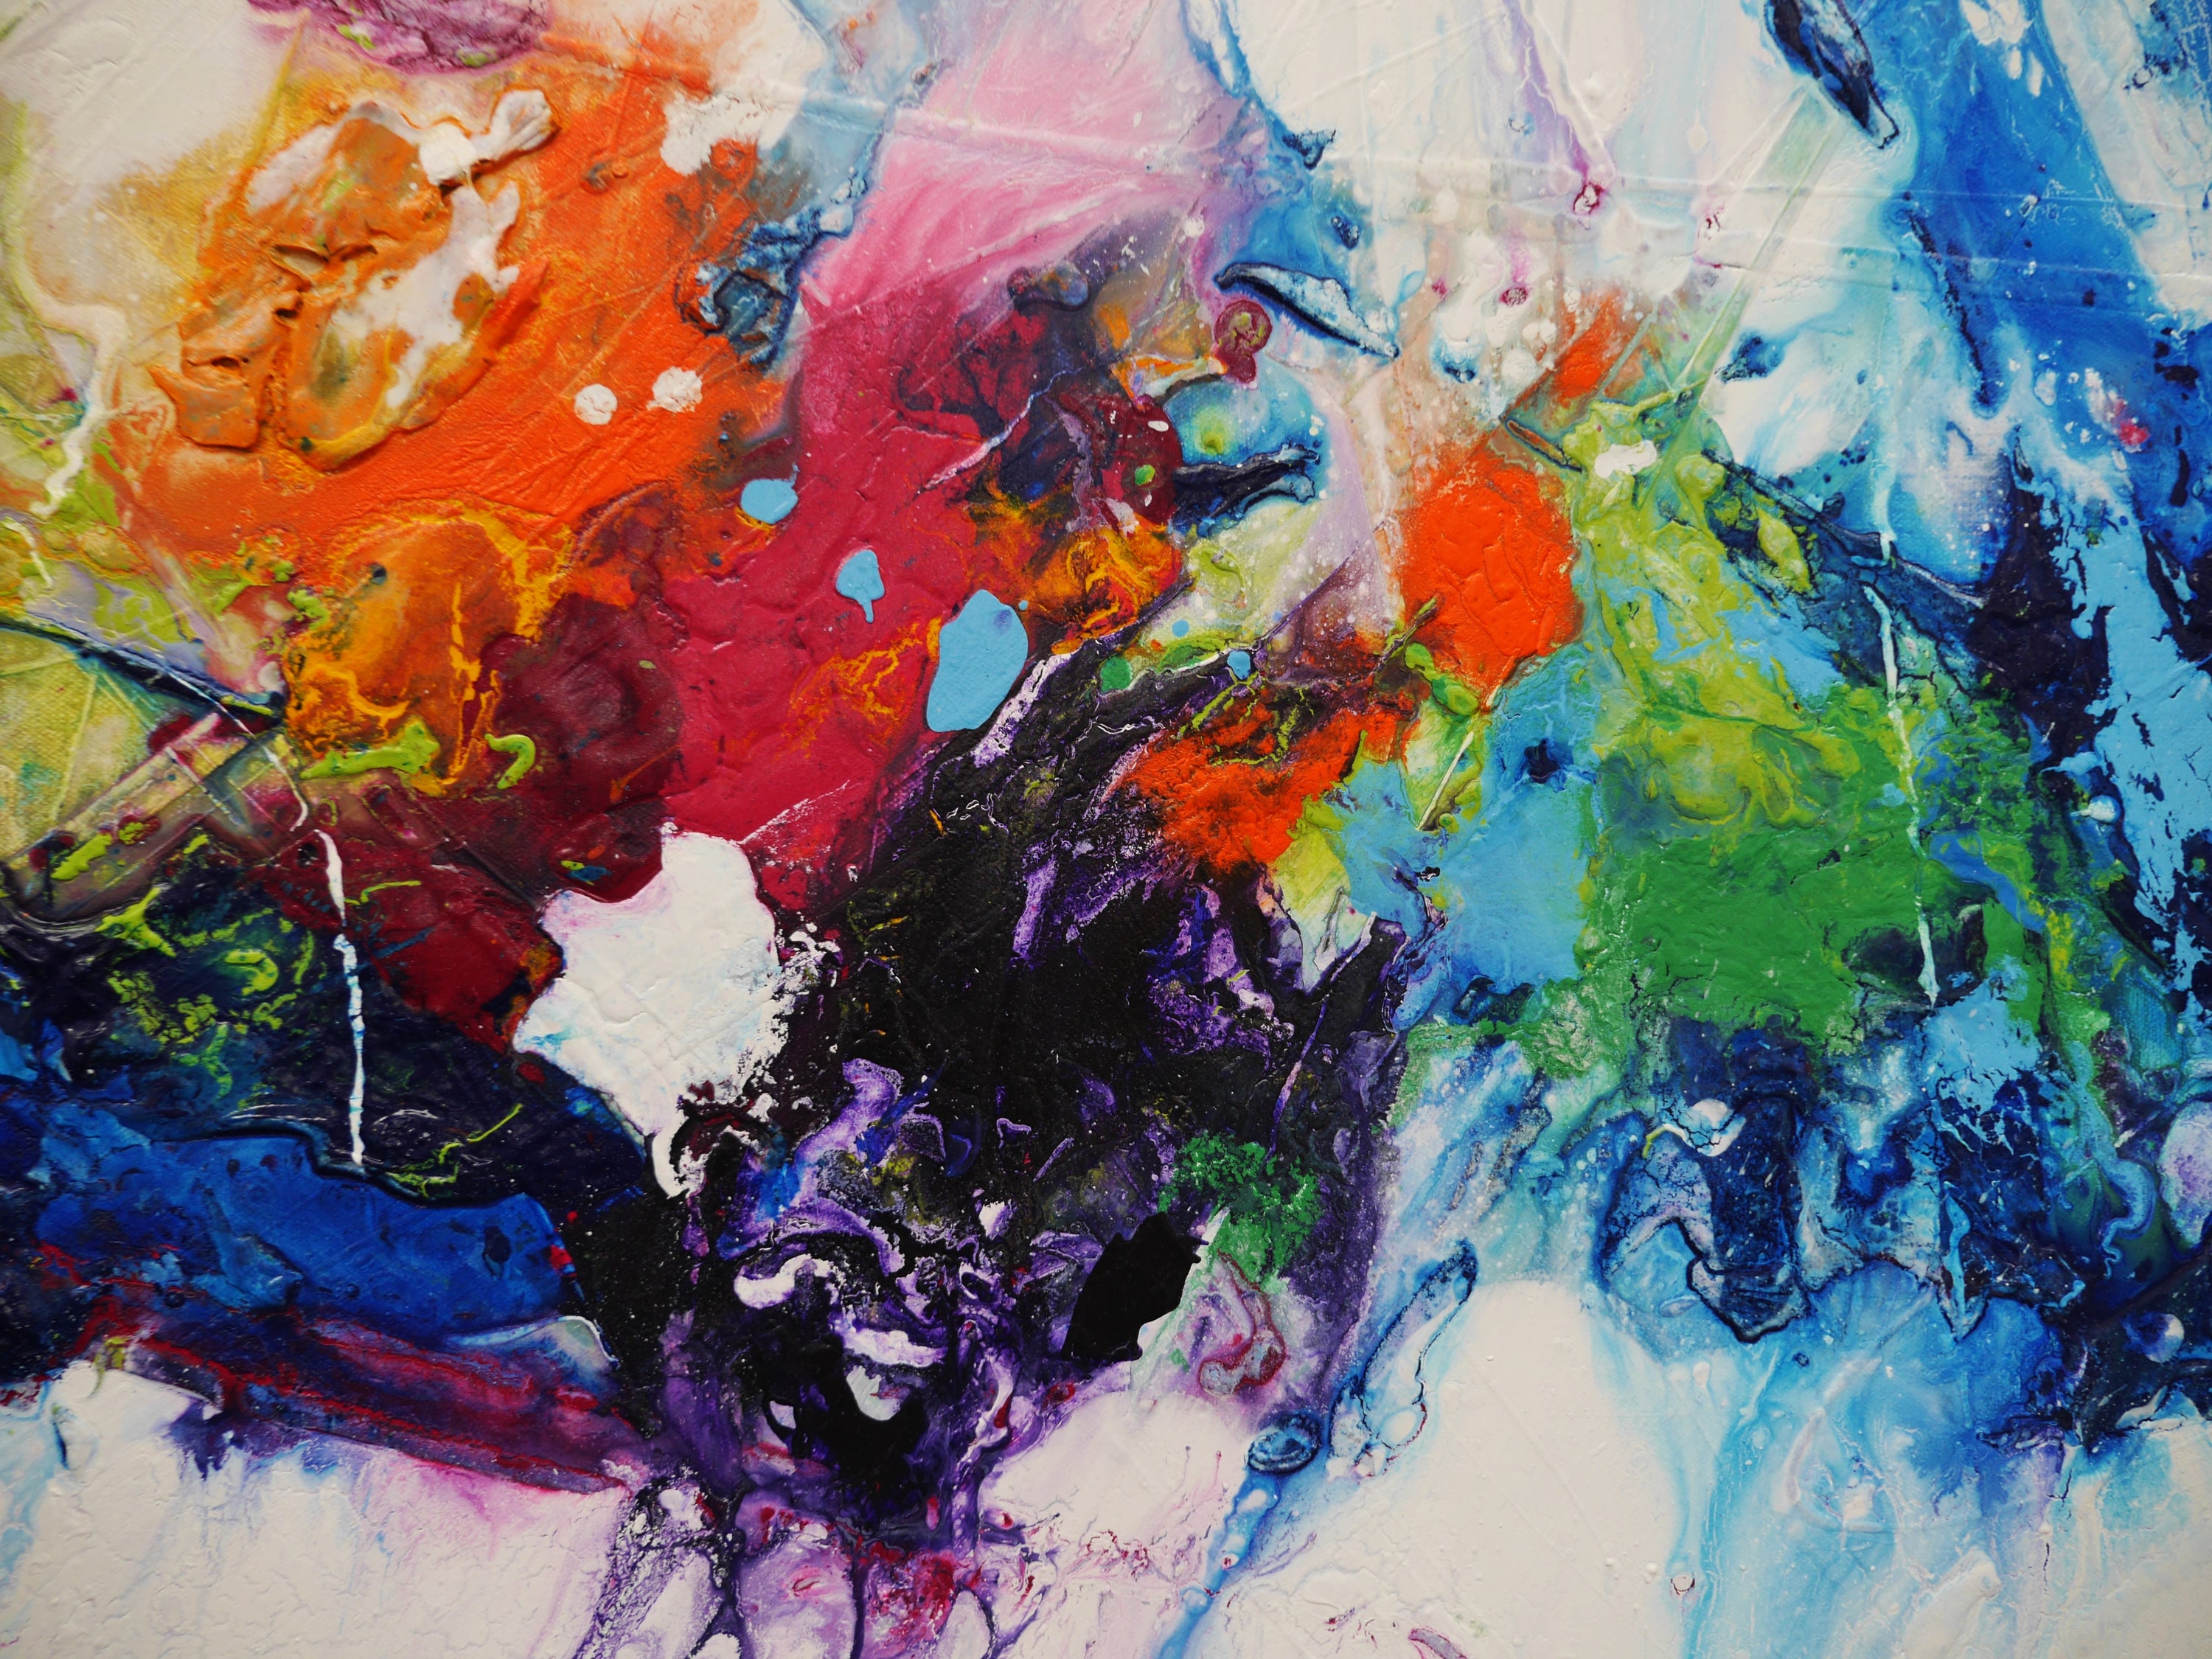 Wildest Bouquet 200cm x 80cm Colourful Textured Abstract Painting